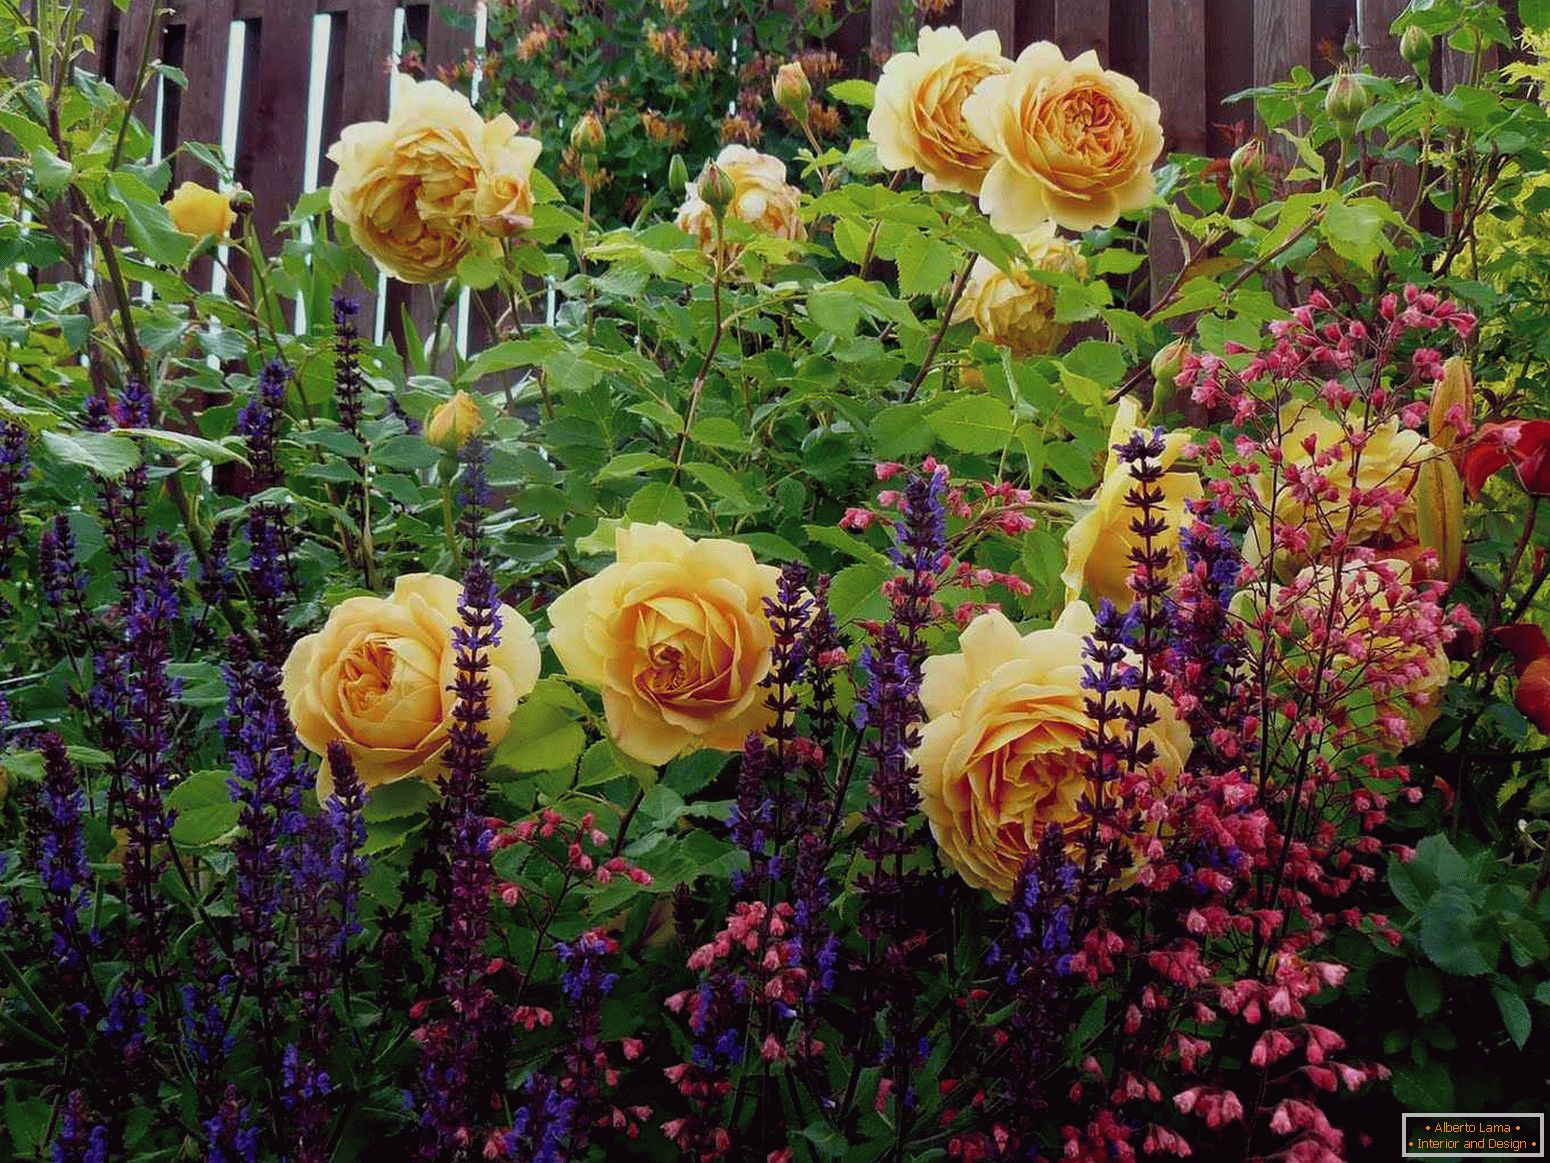 Roses in the mixborder